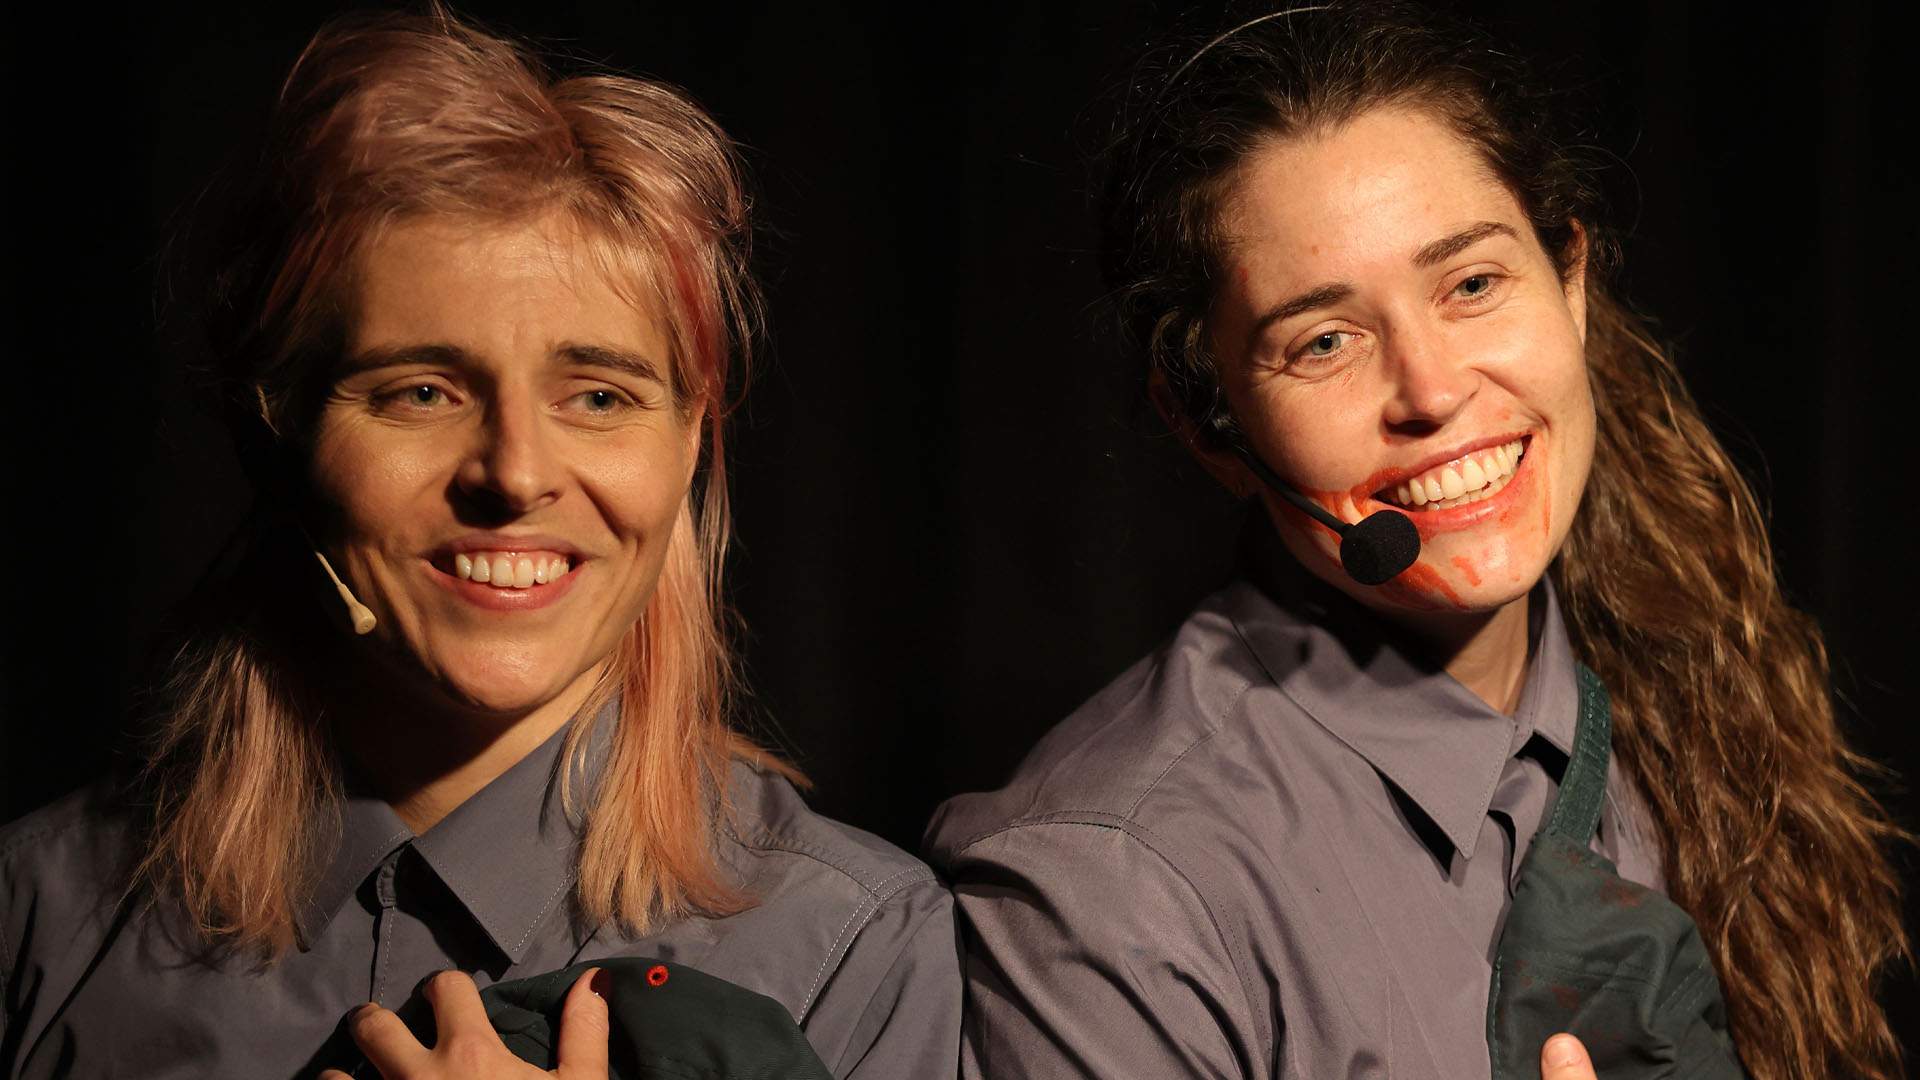 Two comedians in grey shirts and blood on their mouths holding Bunnings hats as part of the production 'Jazz, or a Bucket of Blood'